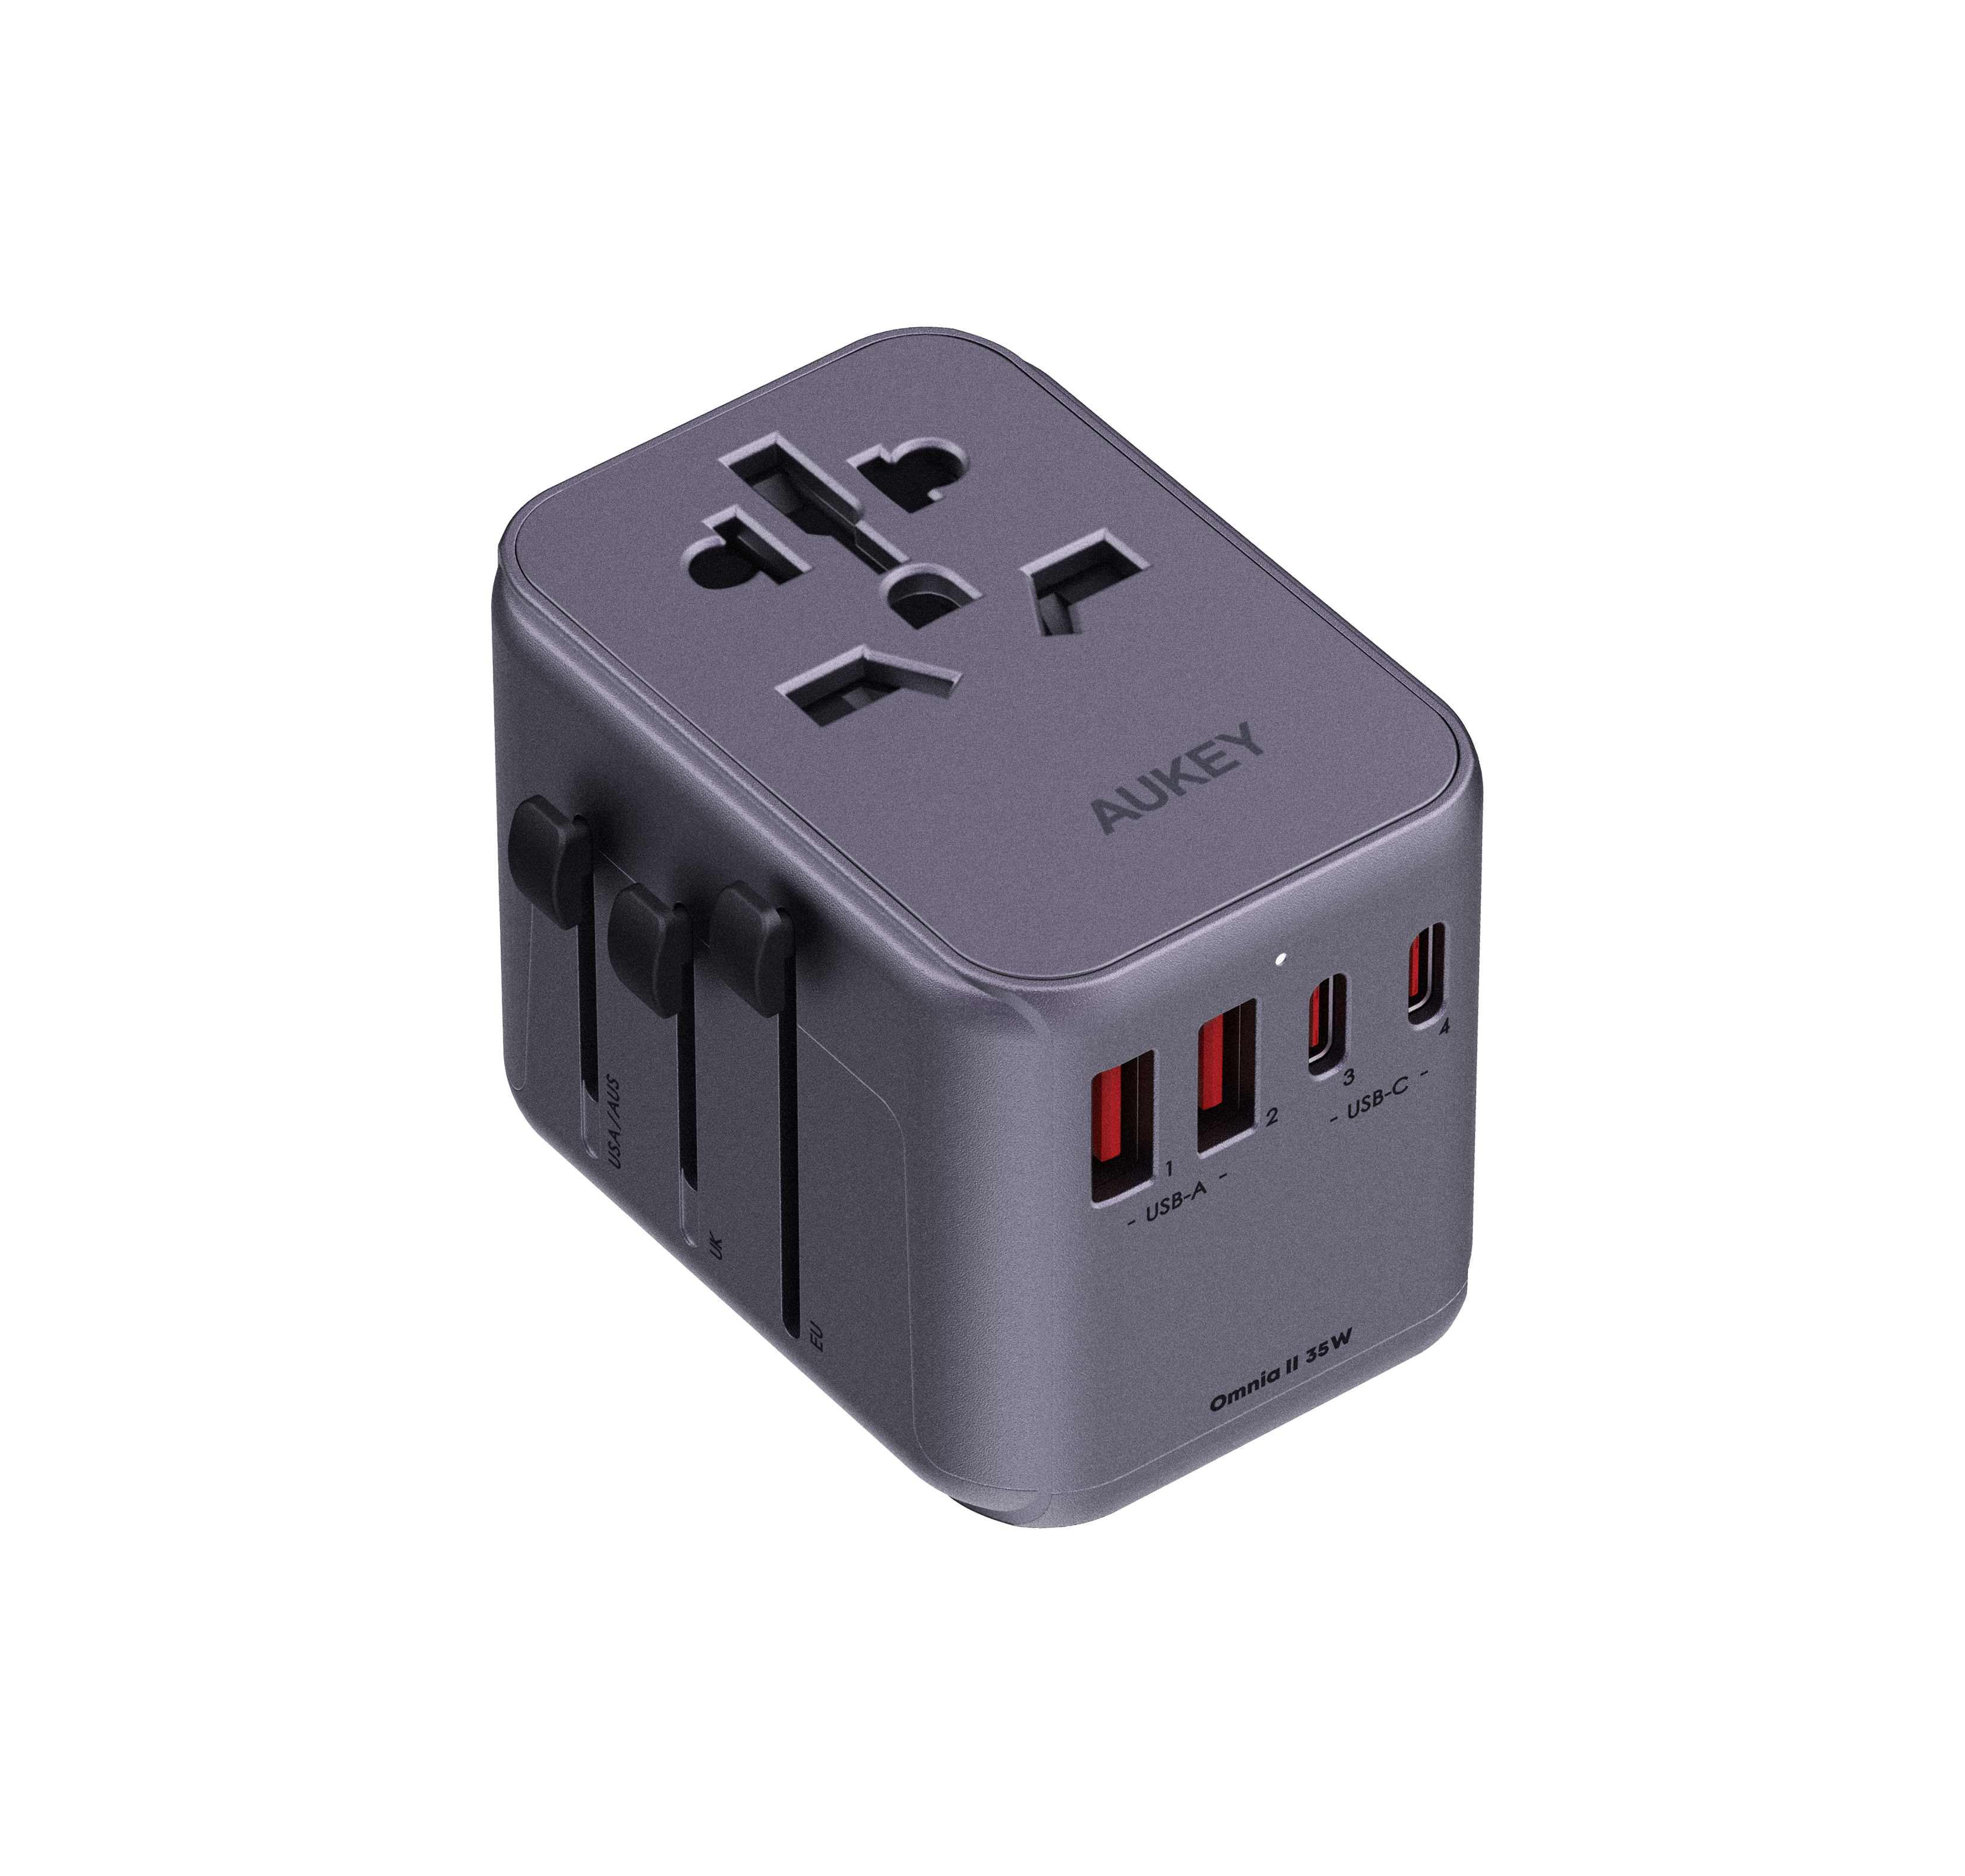 Travel Mate 35W Universal Adapter with USB Ports